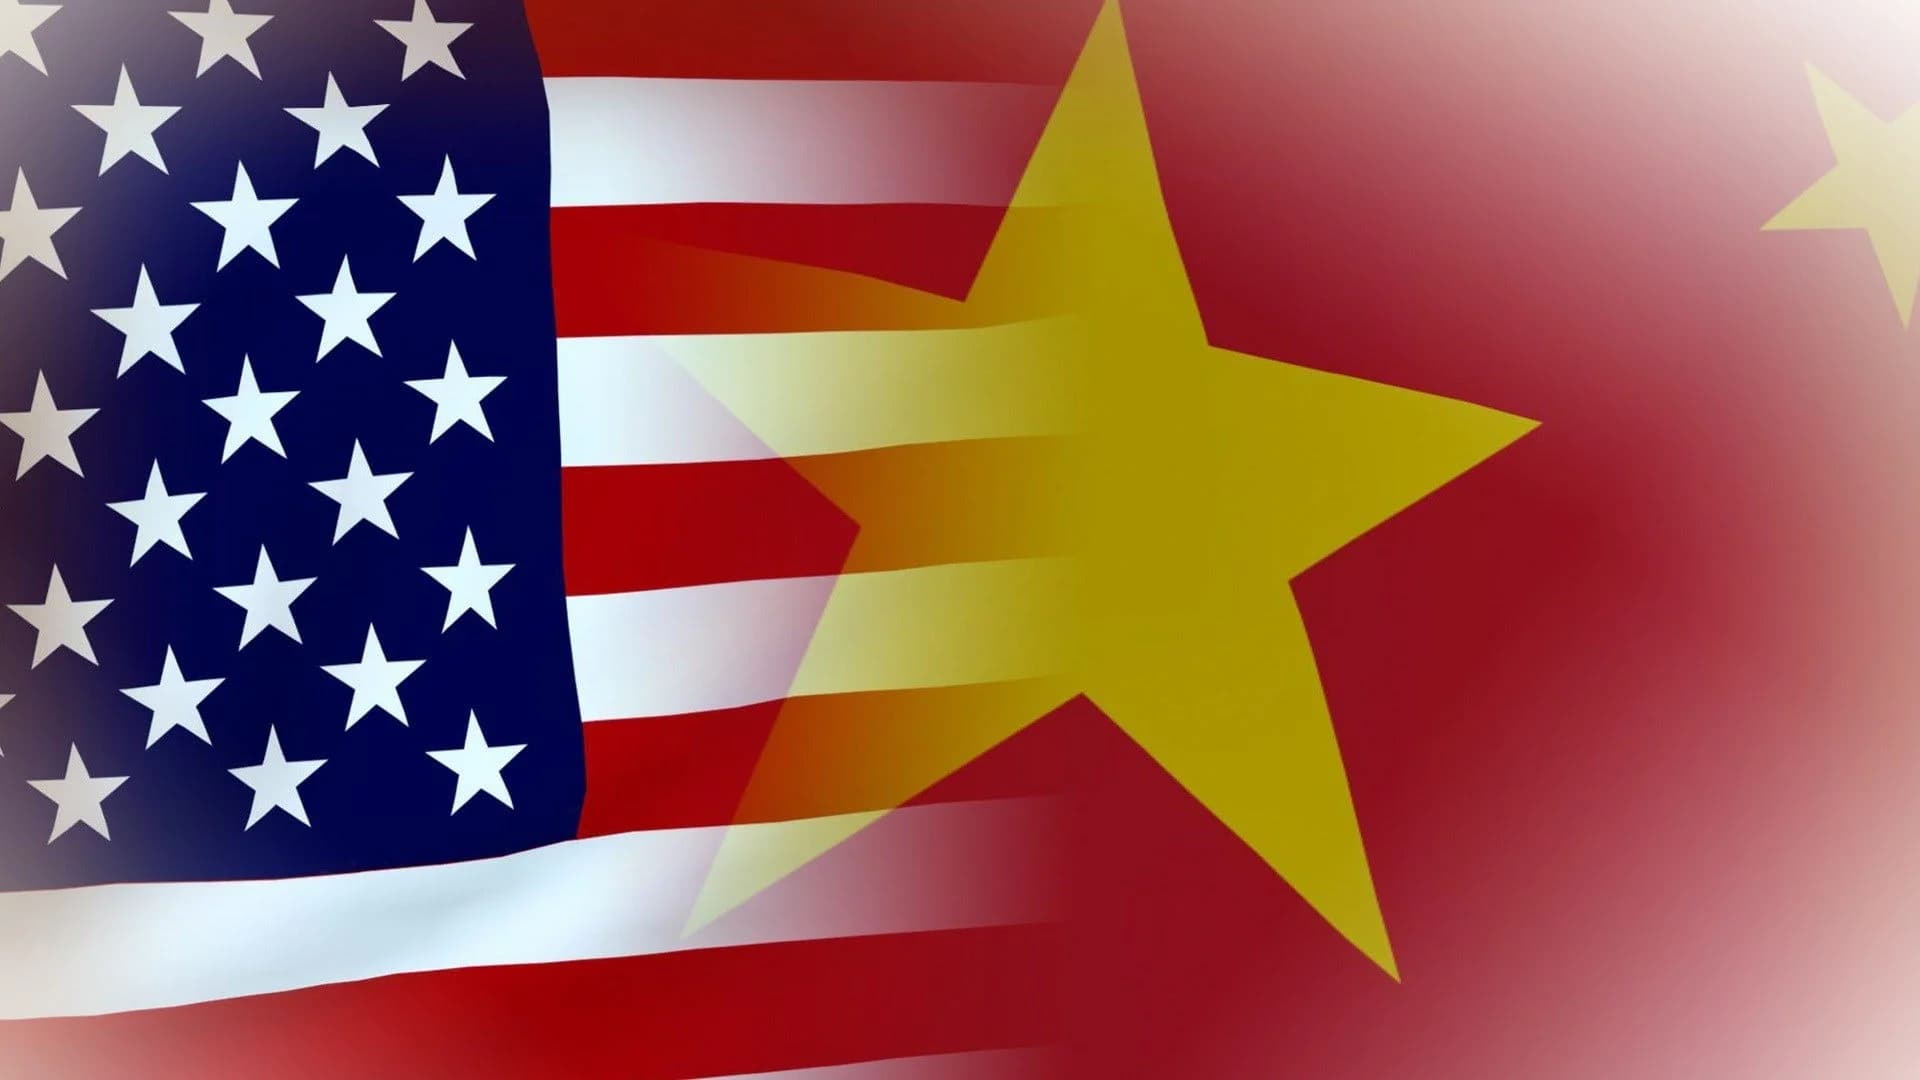 Man explodes small device outside US Embassy in Beijing